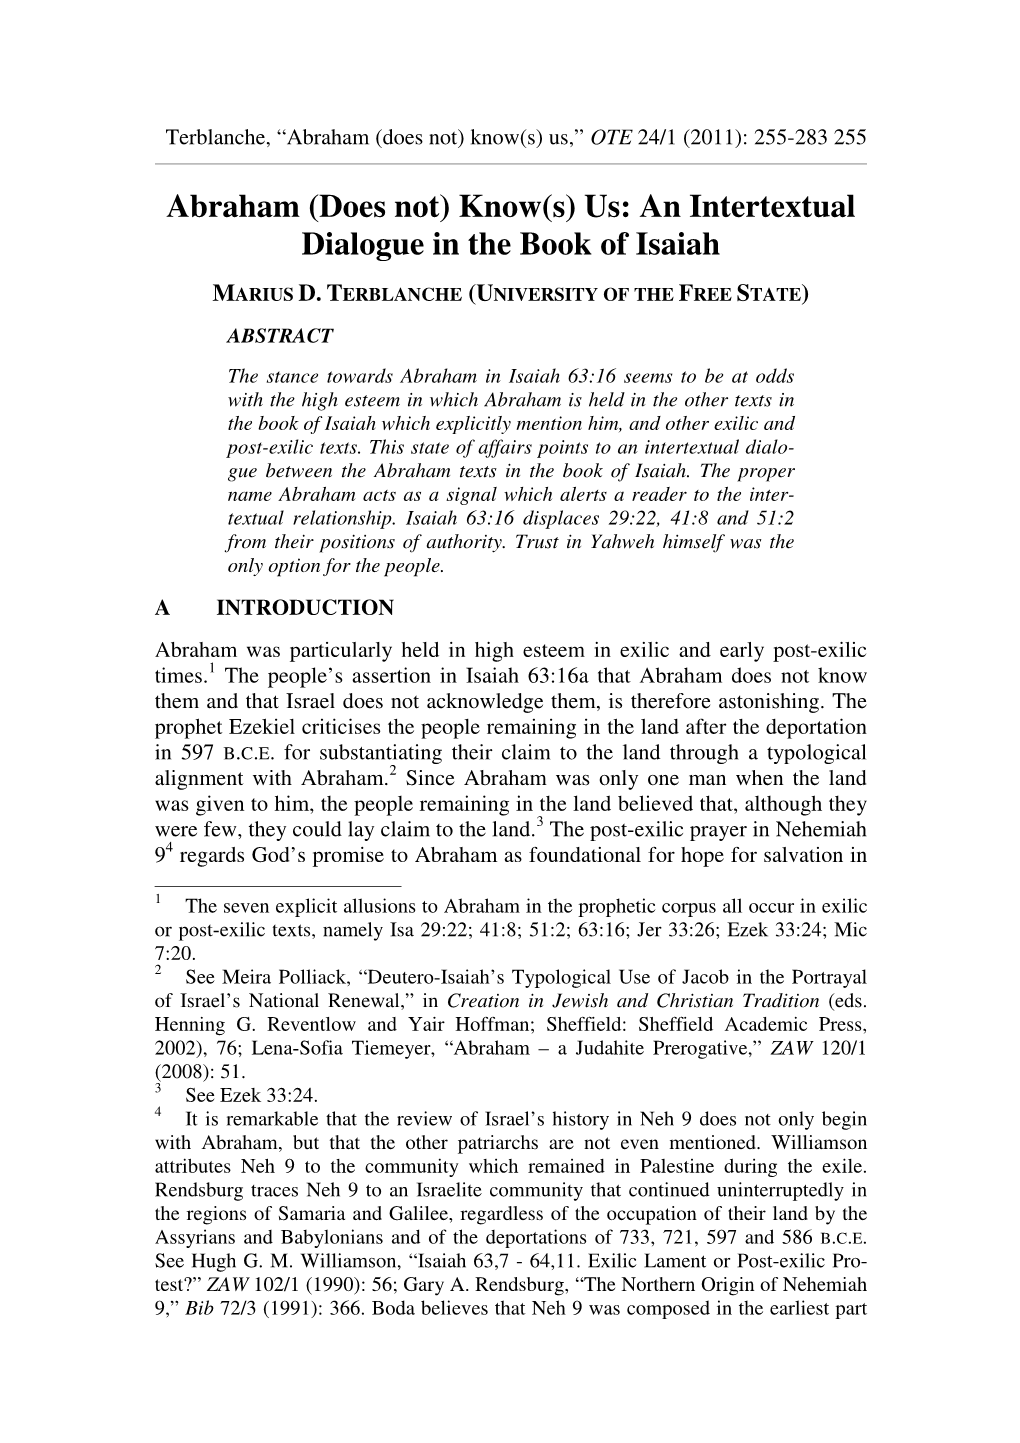 (Does Not) Know(S) Us: an Intertextual Dialogue in the Book of Isaiah